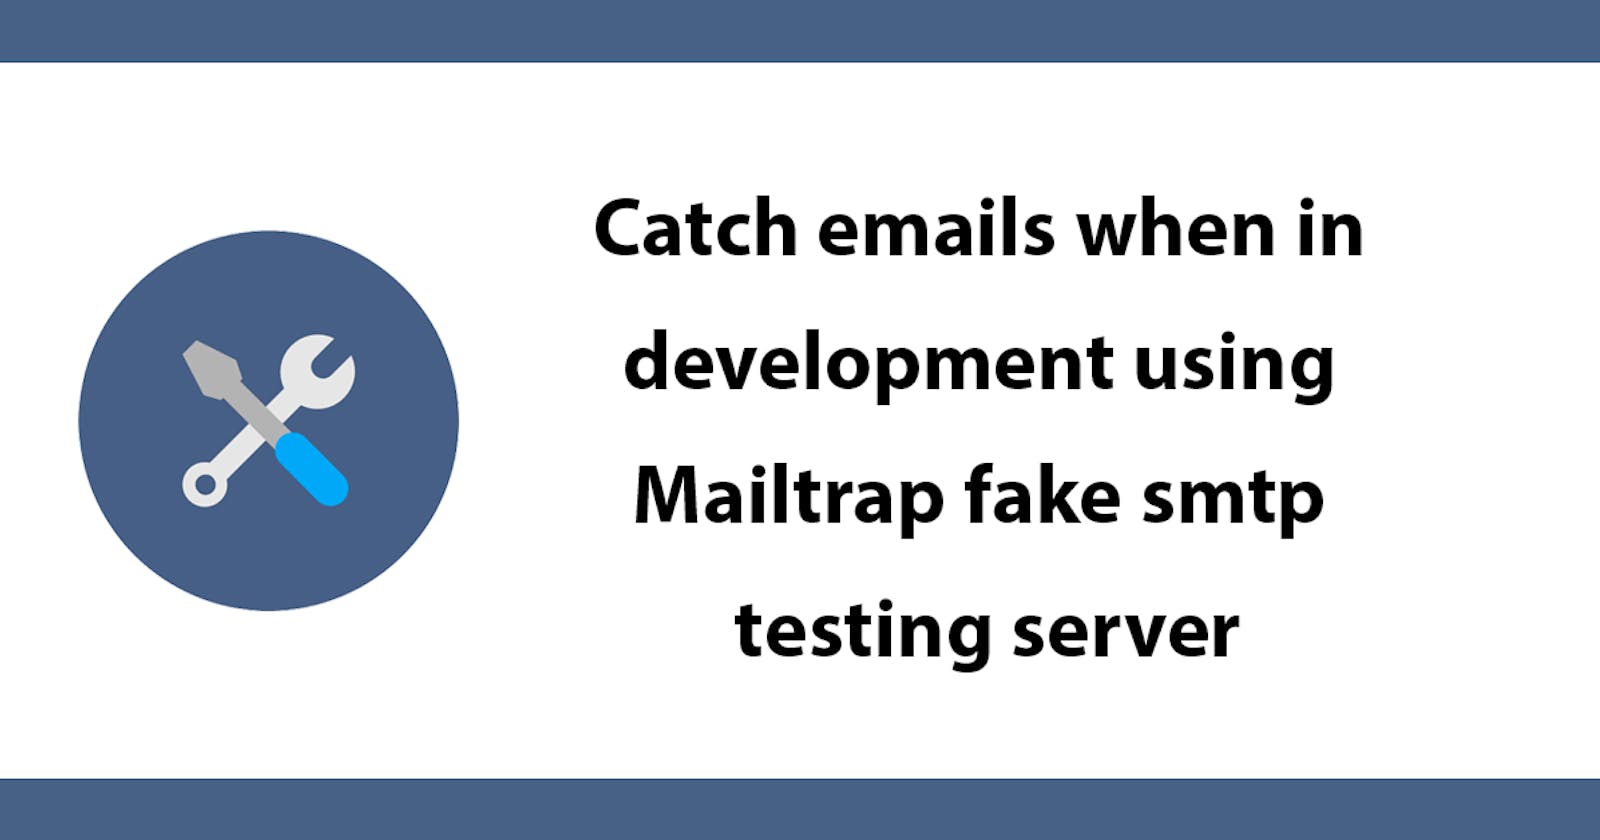 Catch emails when in development using Mailtrap fake smtp testing server